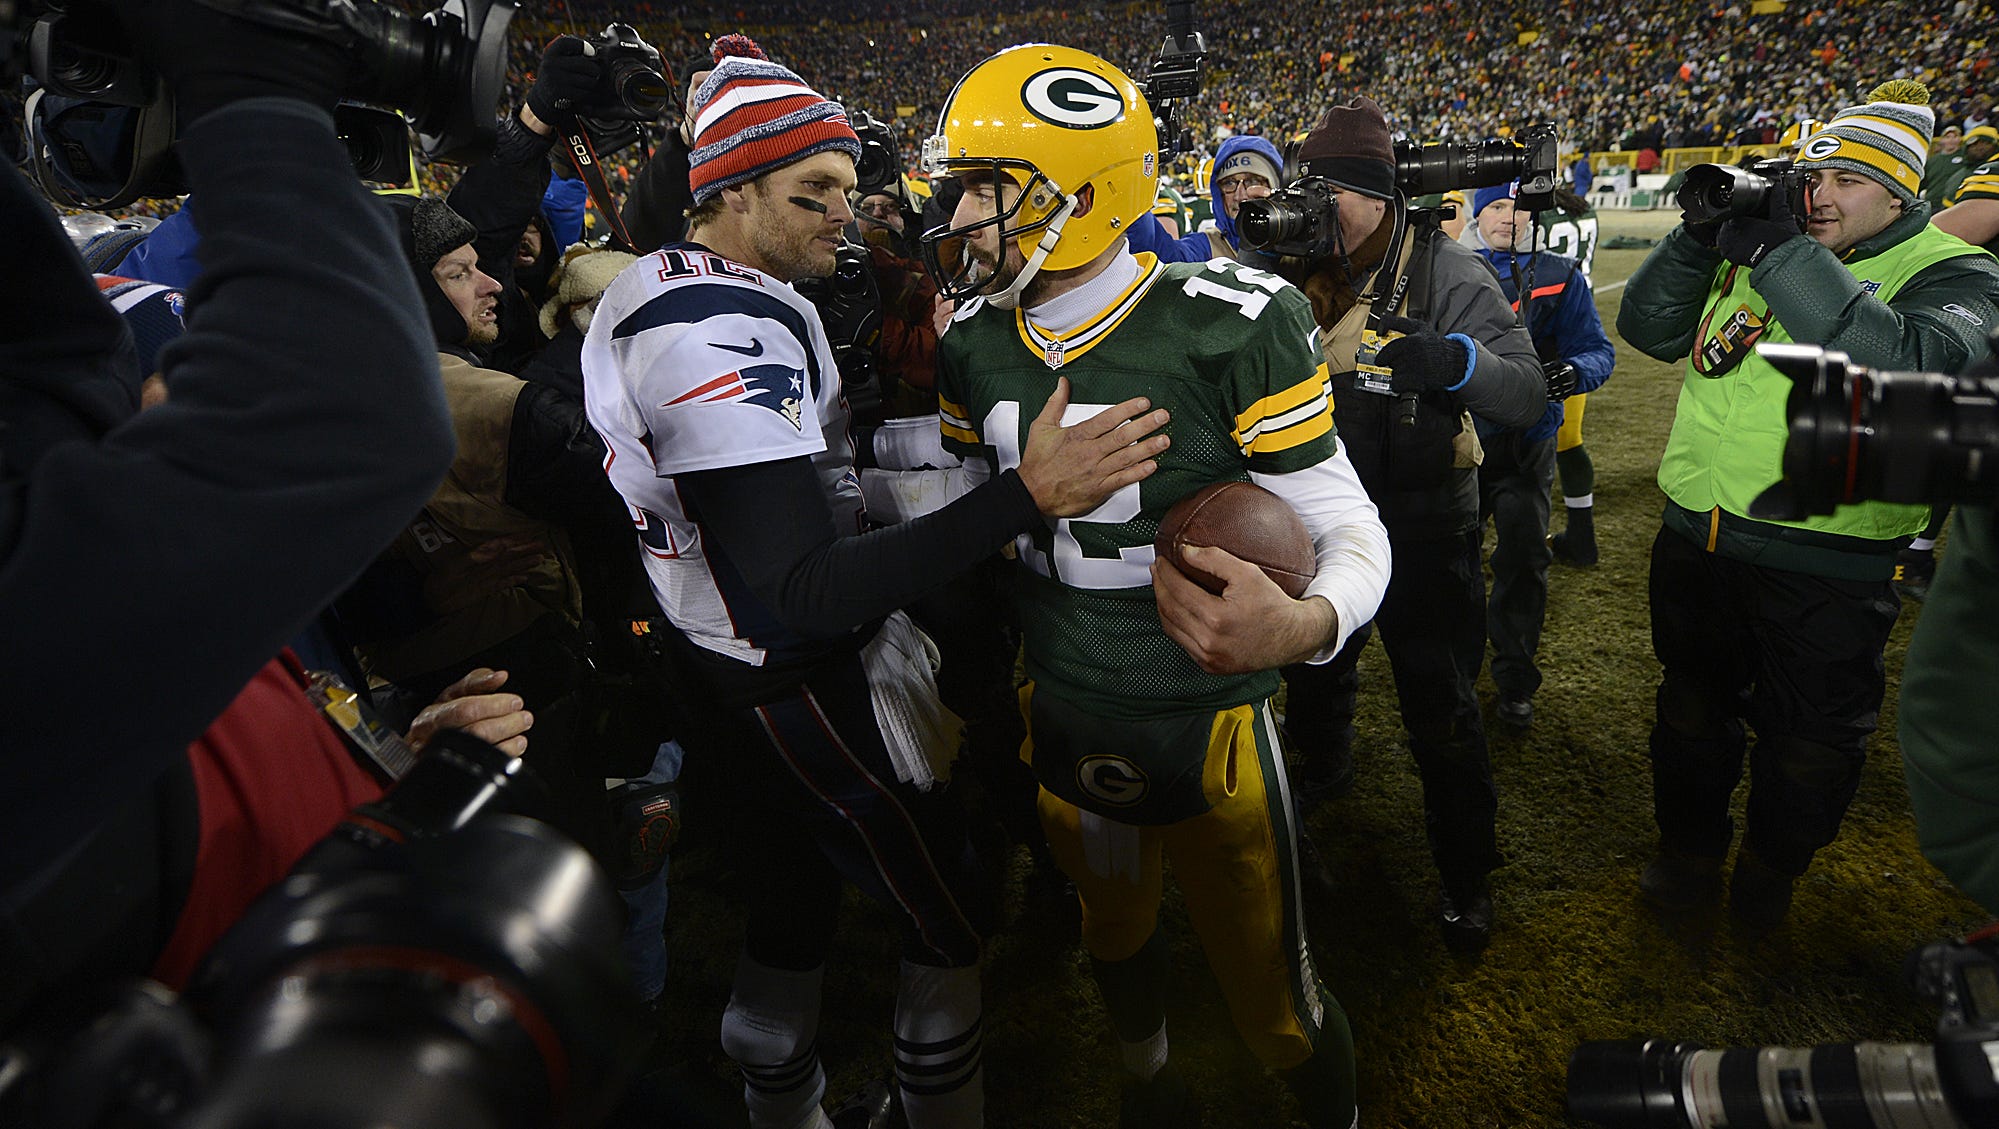 Green Bay Packers quarterback Aaron Rodgers and New England Patriots quarterback Tom Brady exchange words after their game on Nov. 30, 2014, at Lambeau Field.